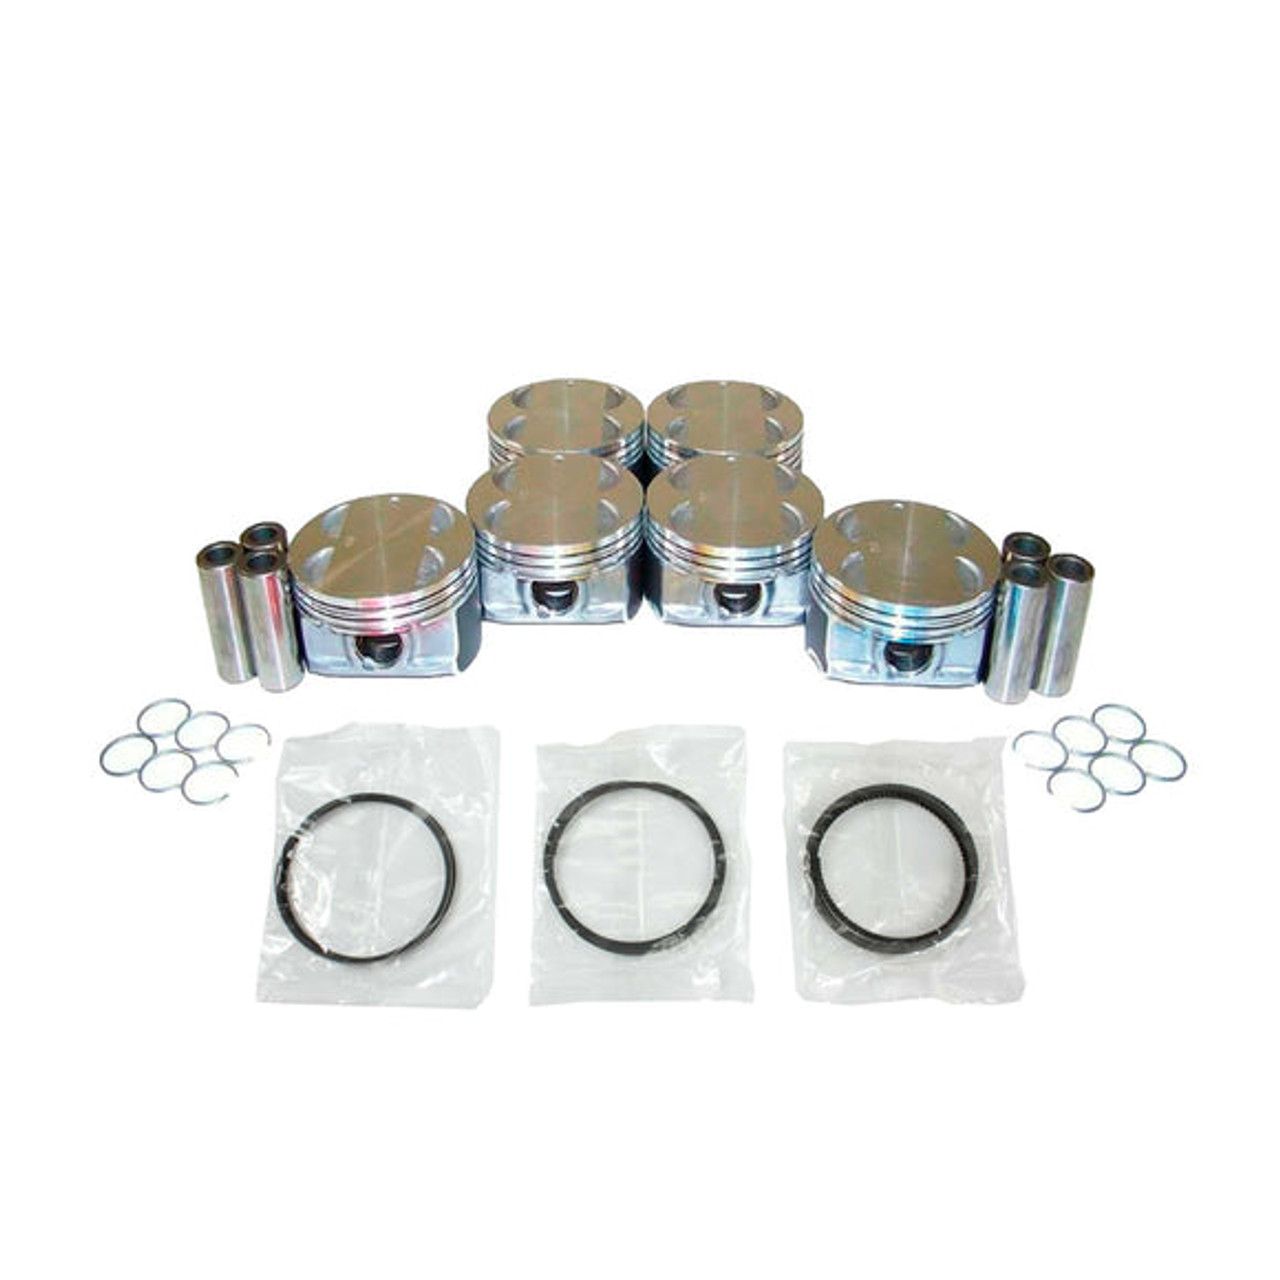 Piston Set with Rings - 2004 Cadillac CTS 3.6L Engine Parts # PRK3136ZE17